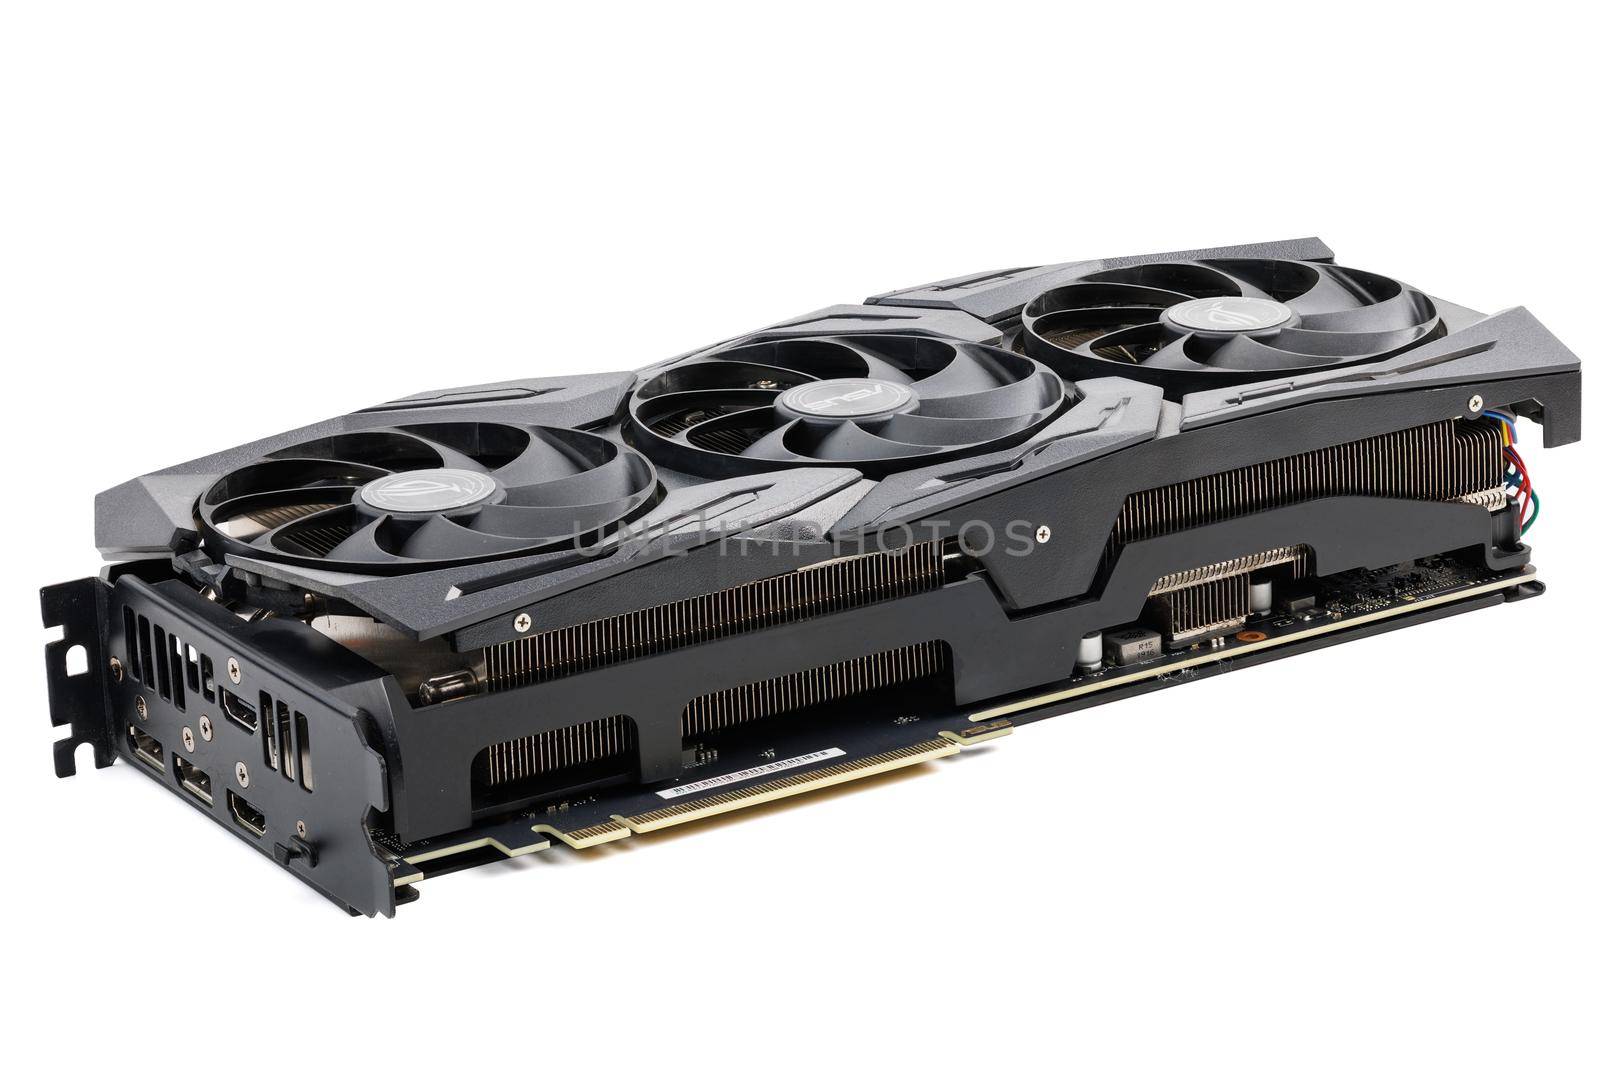 Asus ROG Strix Advanced Nvidia RTX 2070 super - big black contemporary gaming graphics card isolated on white background in Tula, Russia, - July 27, 2022